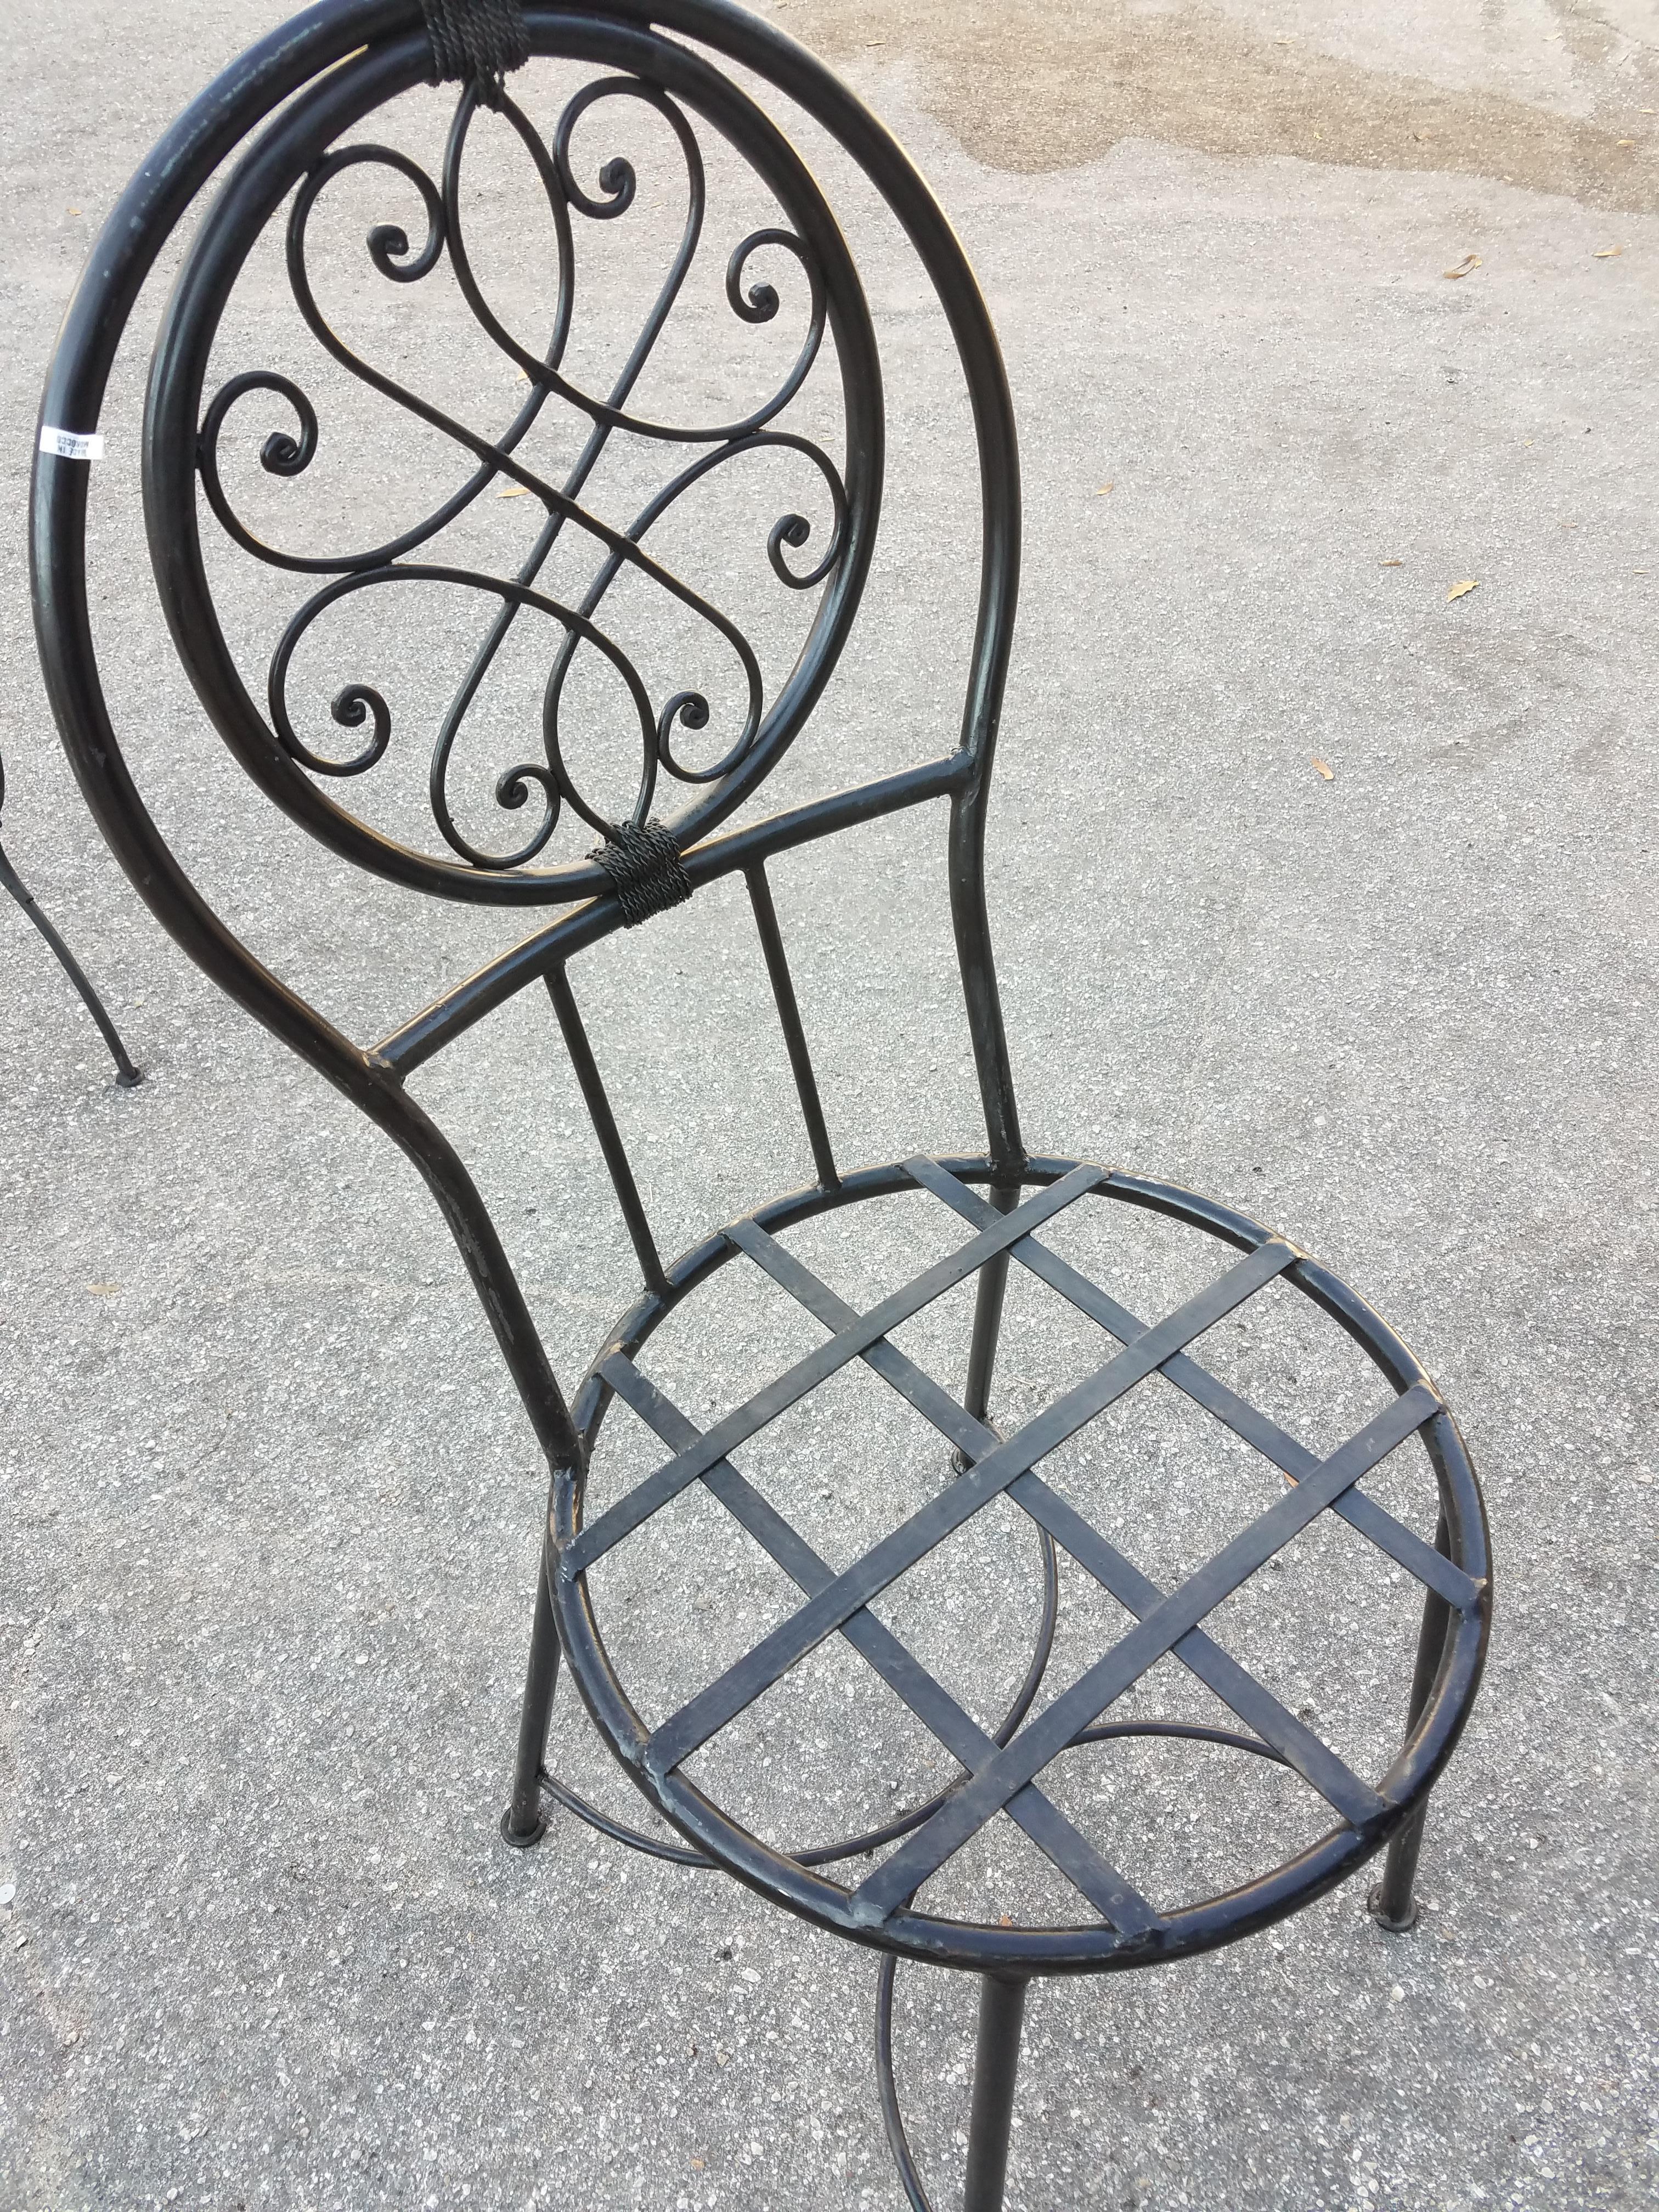 Beautiful Moroccan wrought iron chairs handcrafted in Marrakech, Morocco. Each measuring approximately 38